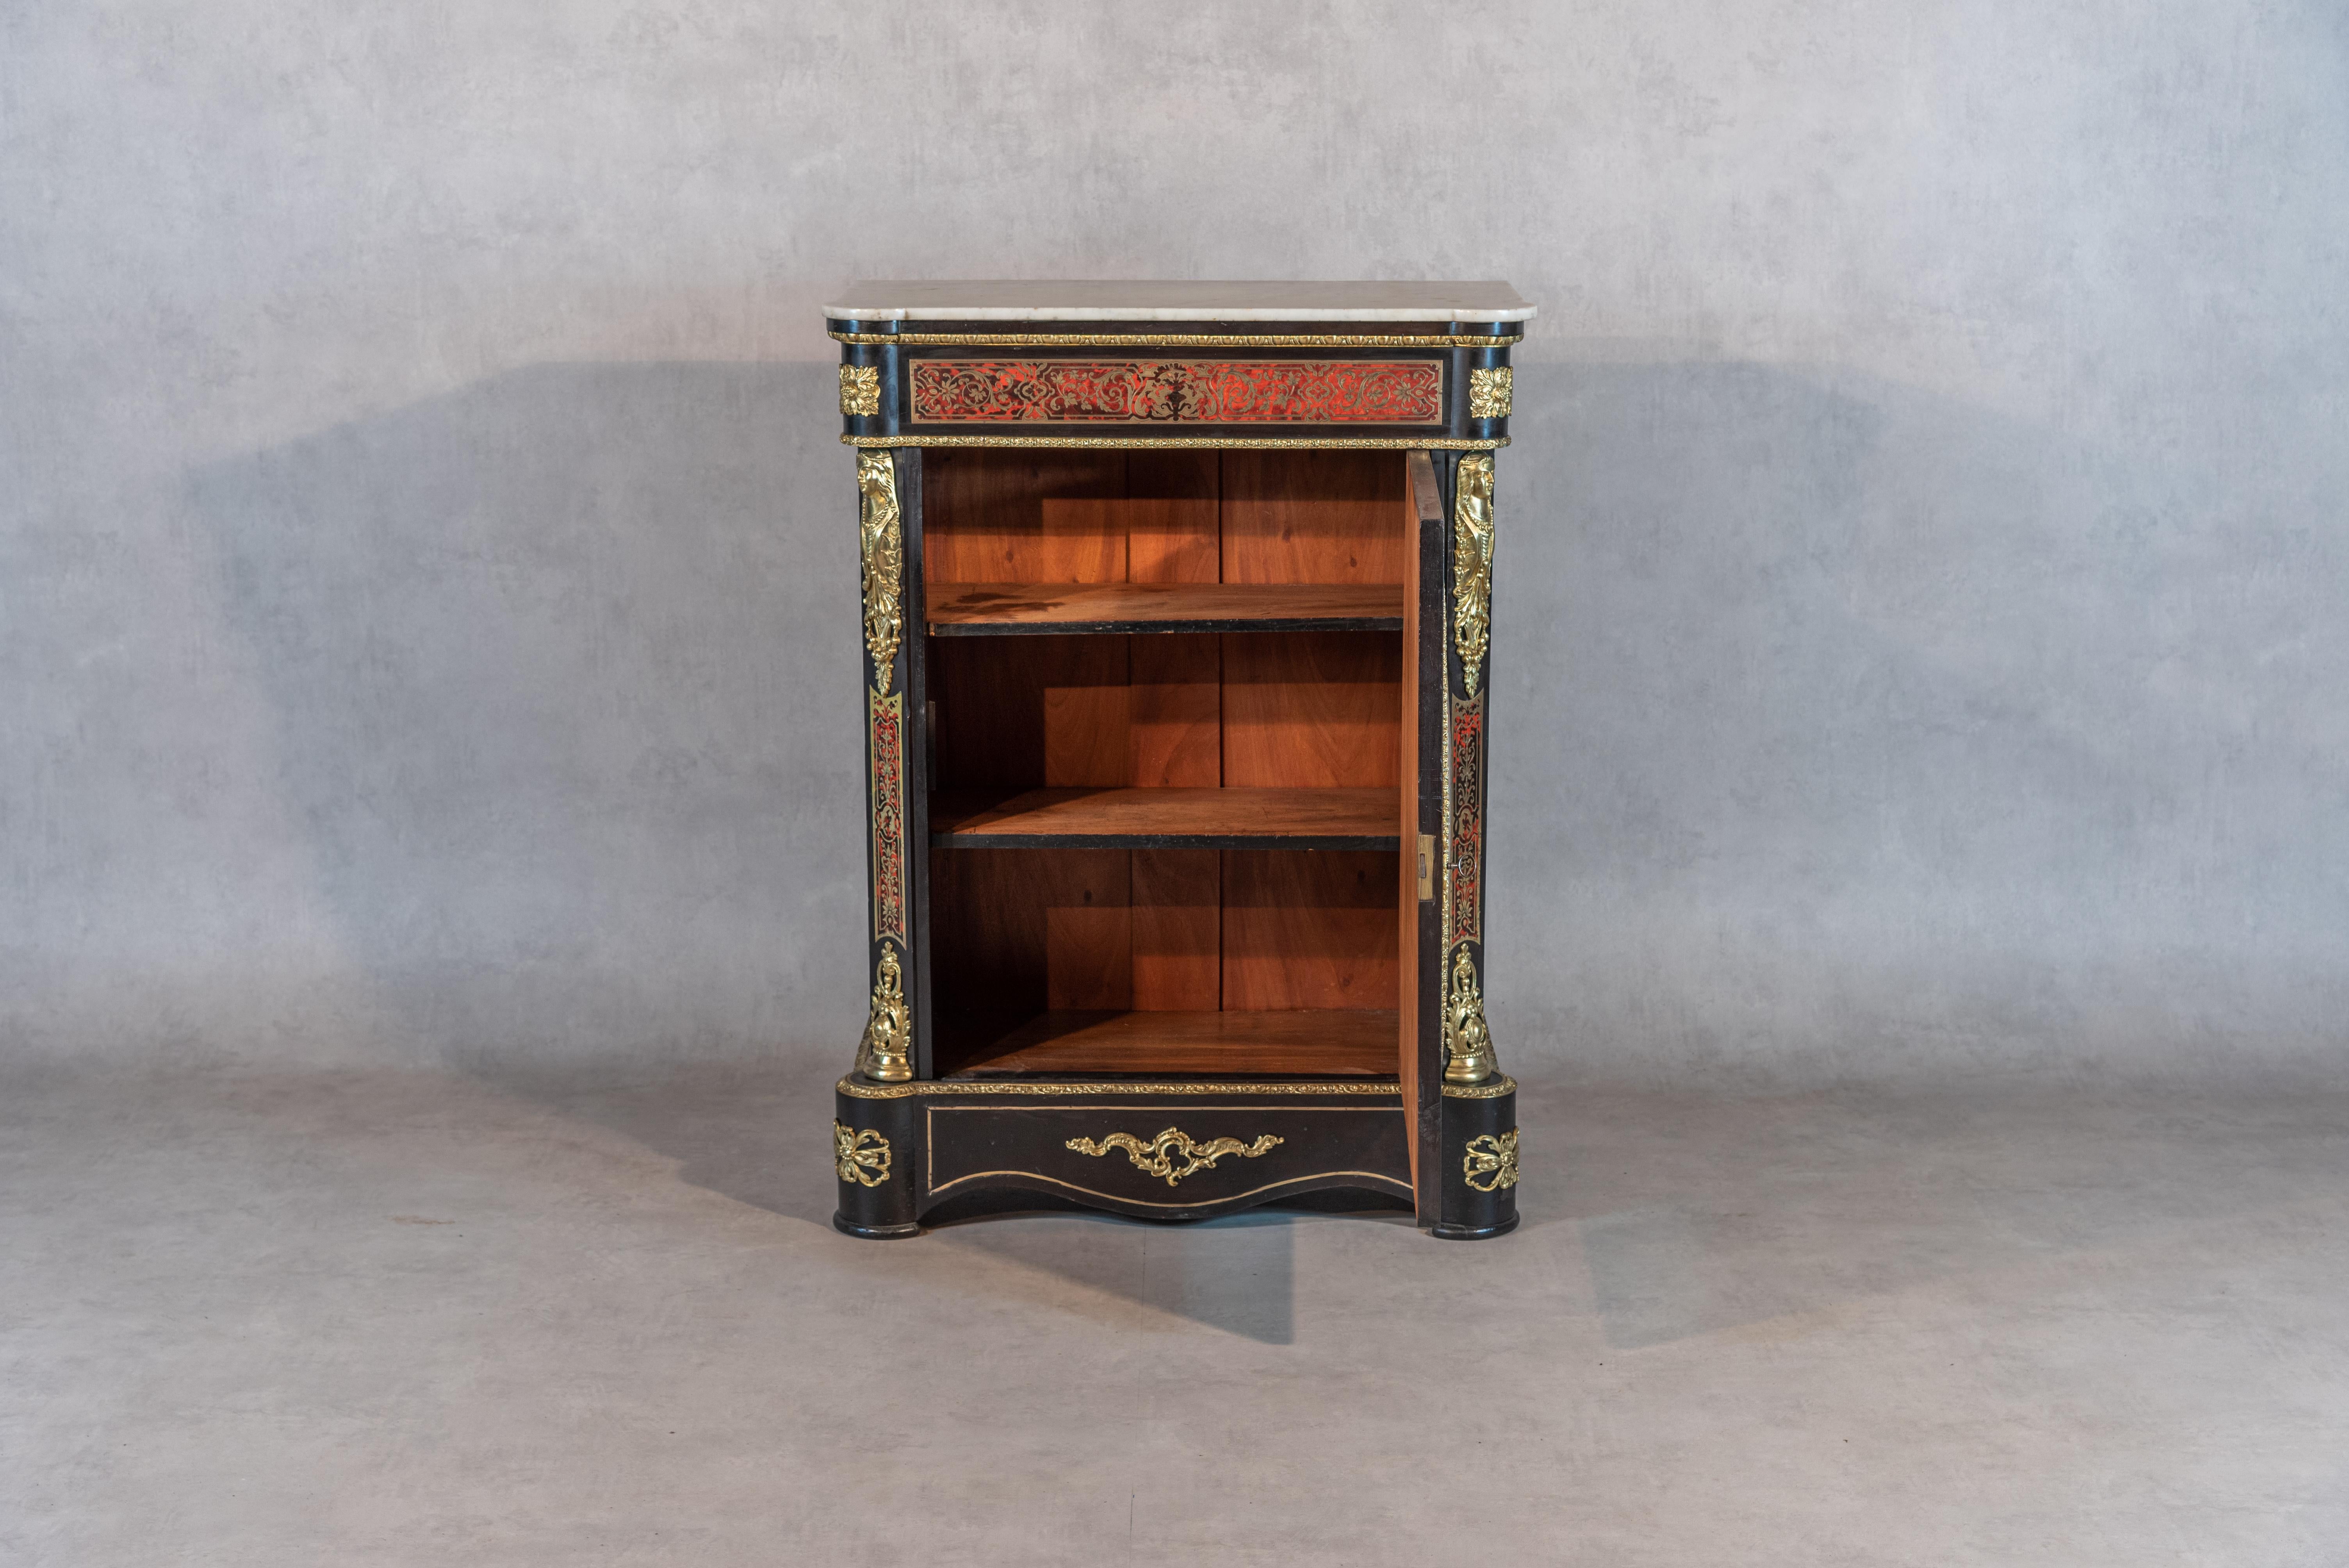 Bring a touch of elegance to your home with this superb 19th-century French Boulle buffet or cabinet, hailing from the Napoleon III period. This rare and authentic piece boasts stunning brass and bronze ornamentations, creating an exquisite contrast